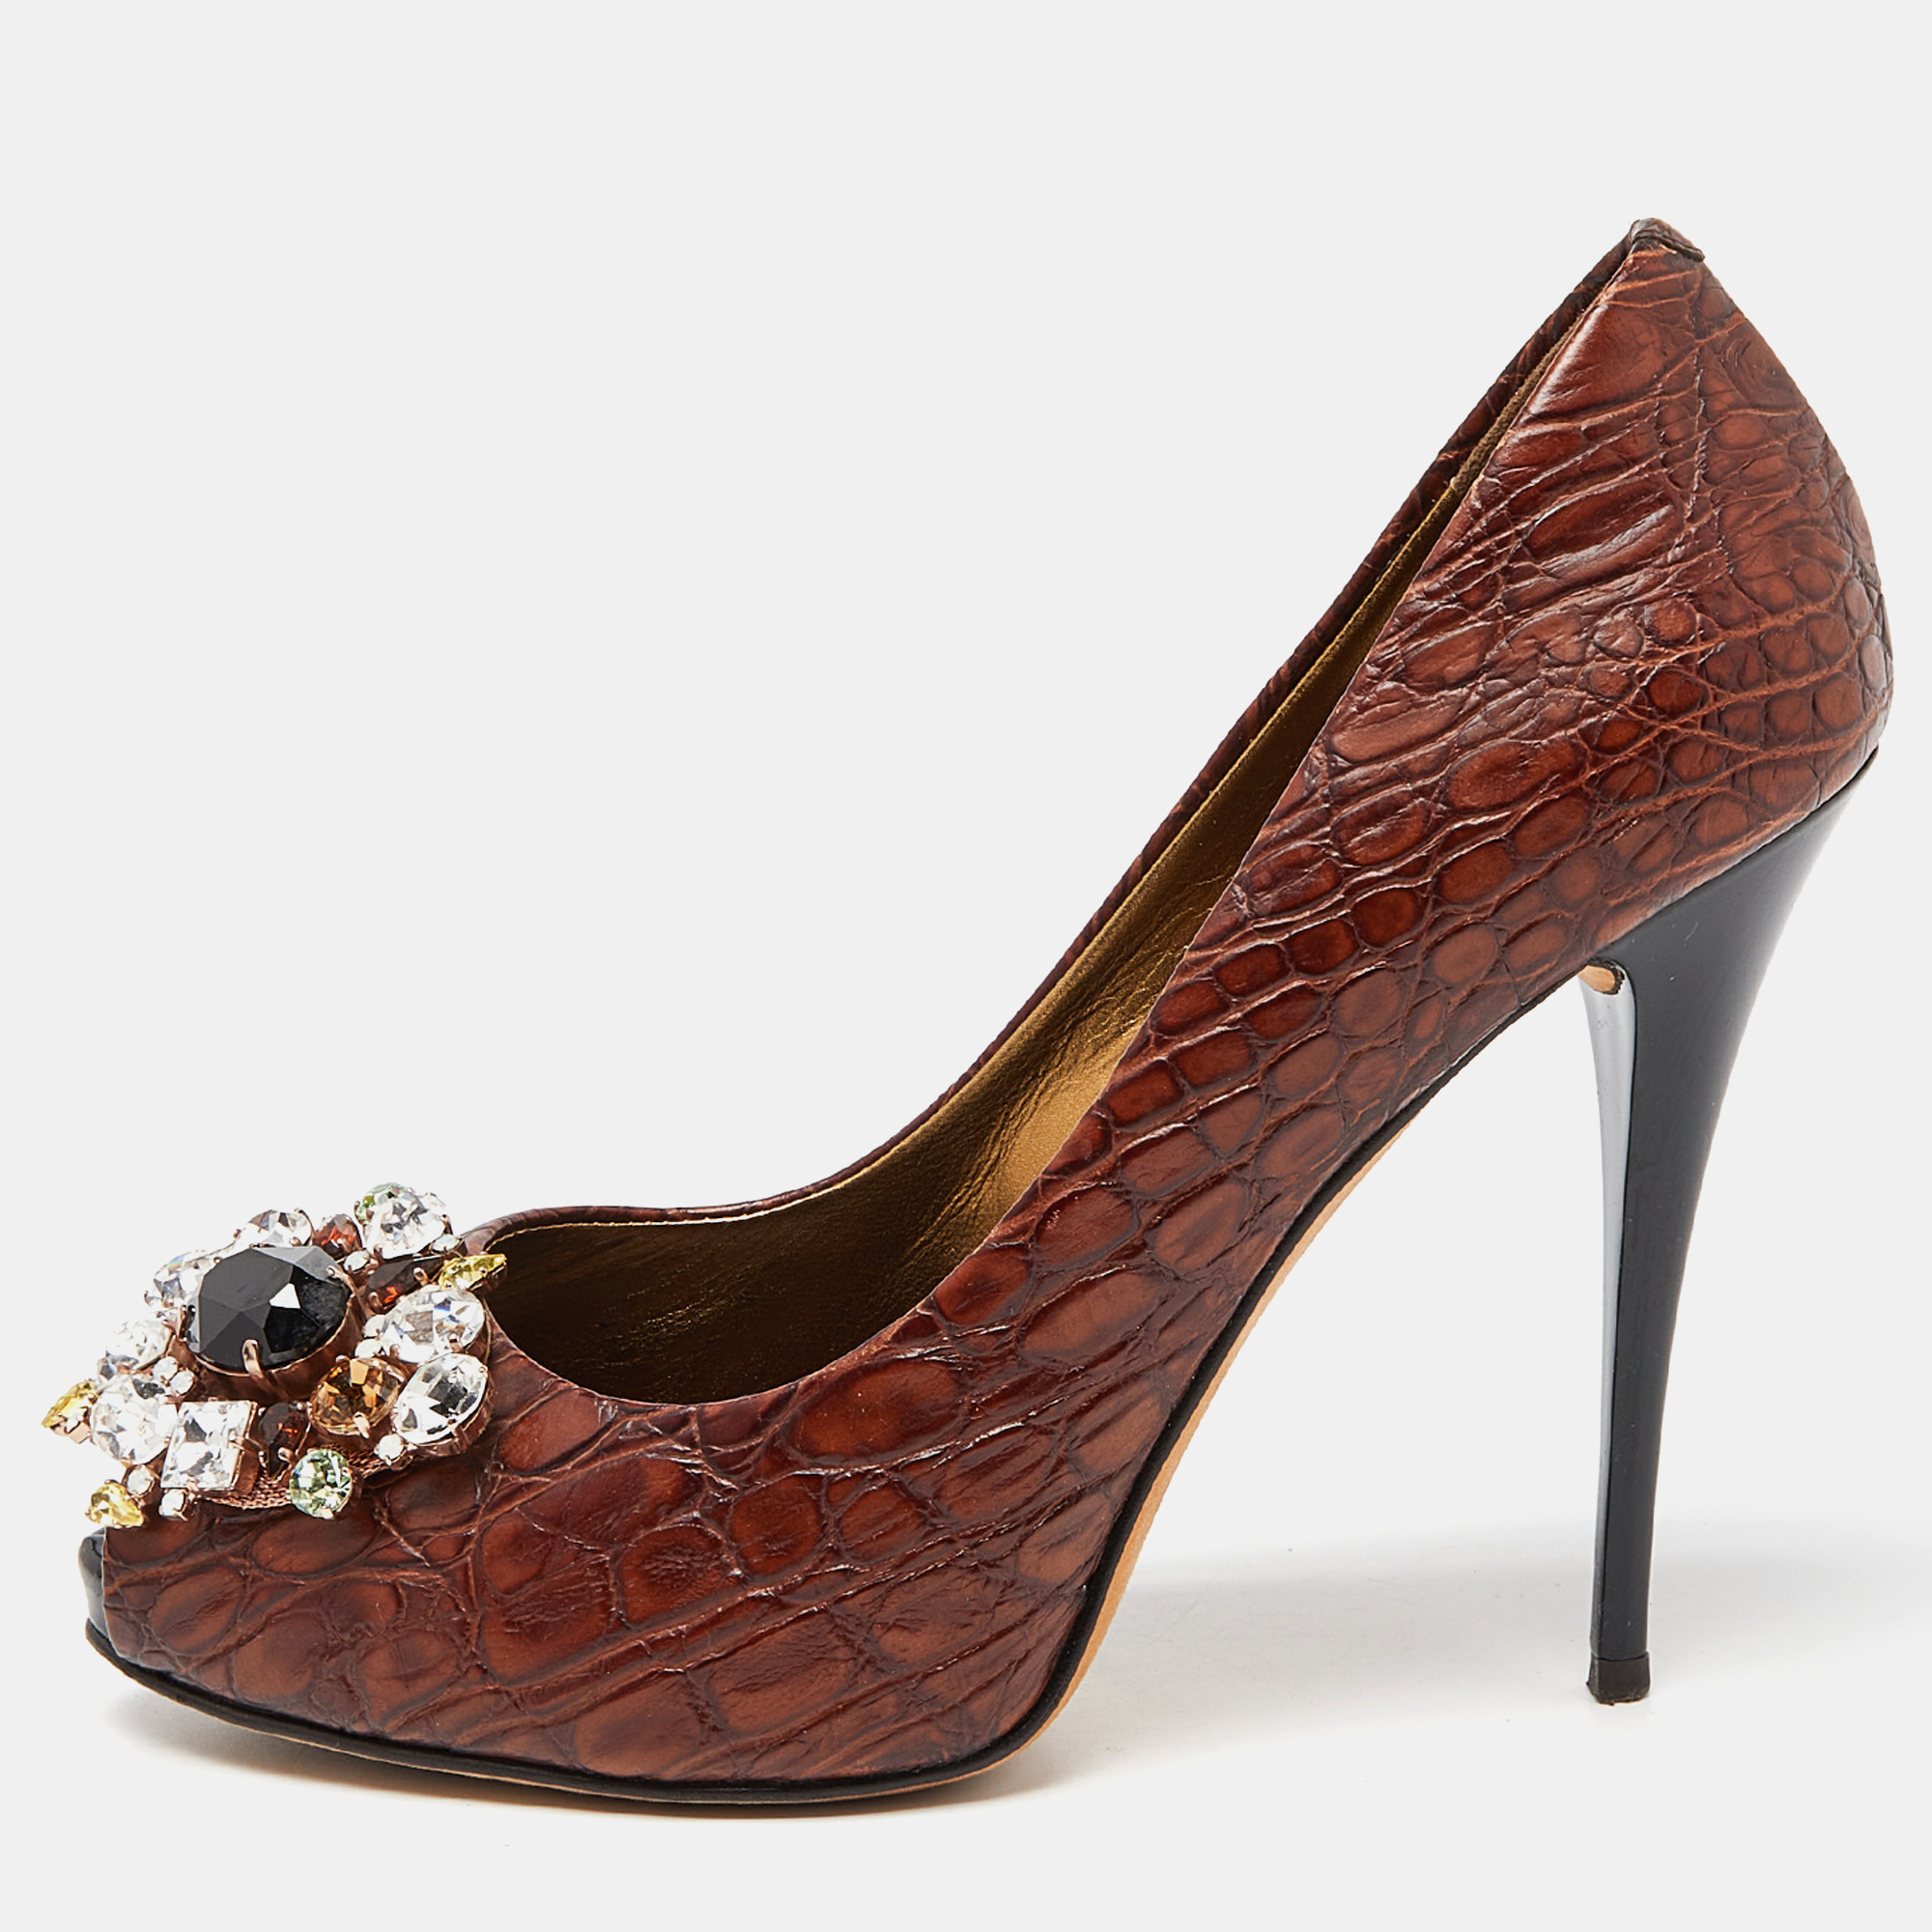 Pre-owned Giuseppe Zanotti Brown Croc Embossed Leather Crystal Embellished Peep Toe Pumps Size 37